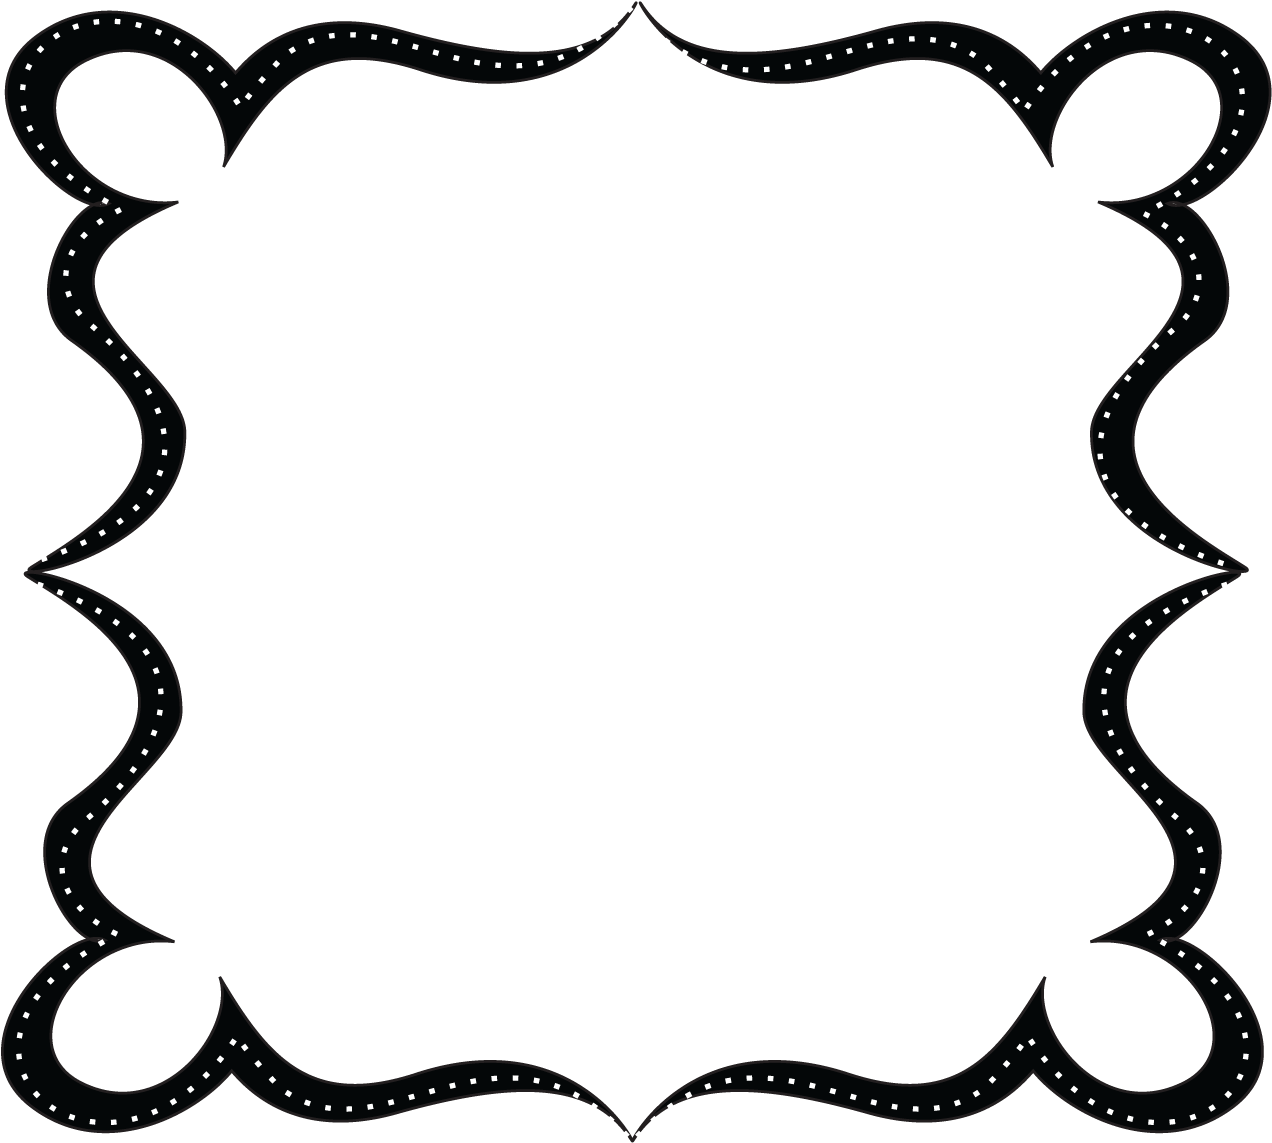 Decorative Text Box Frame PNG Background Image.